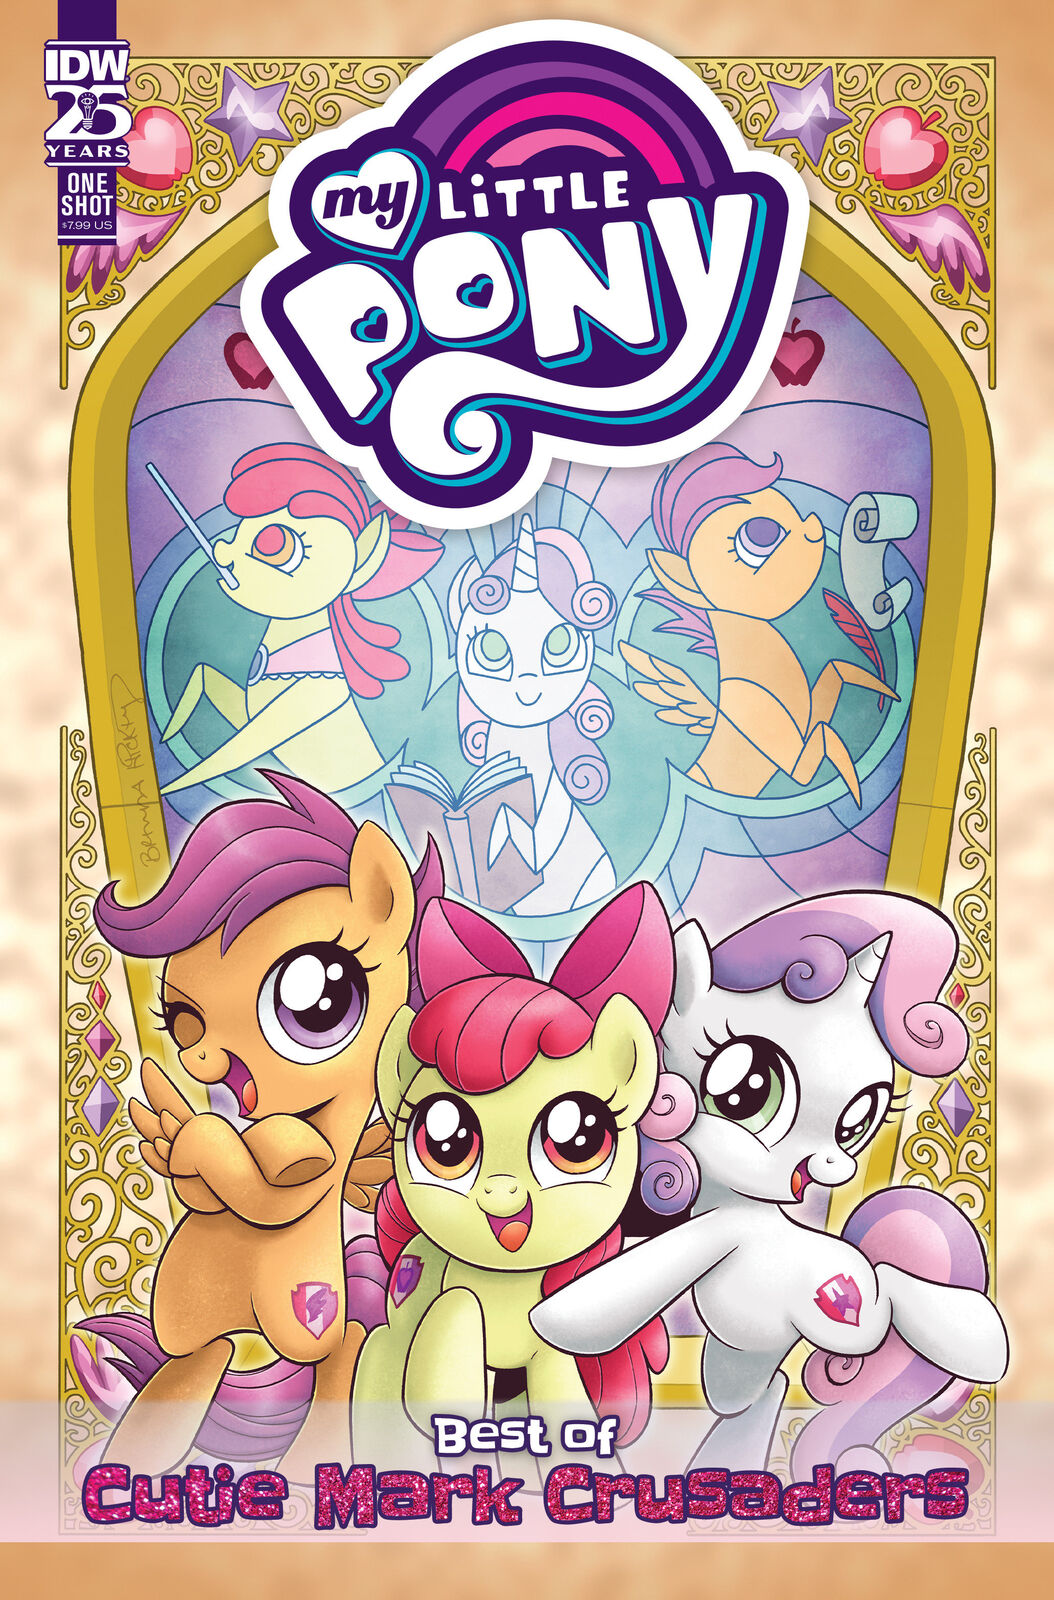 My Little Pony: Best of Cutie Mark Crusaders Cover A (Hickey)